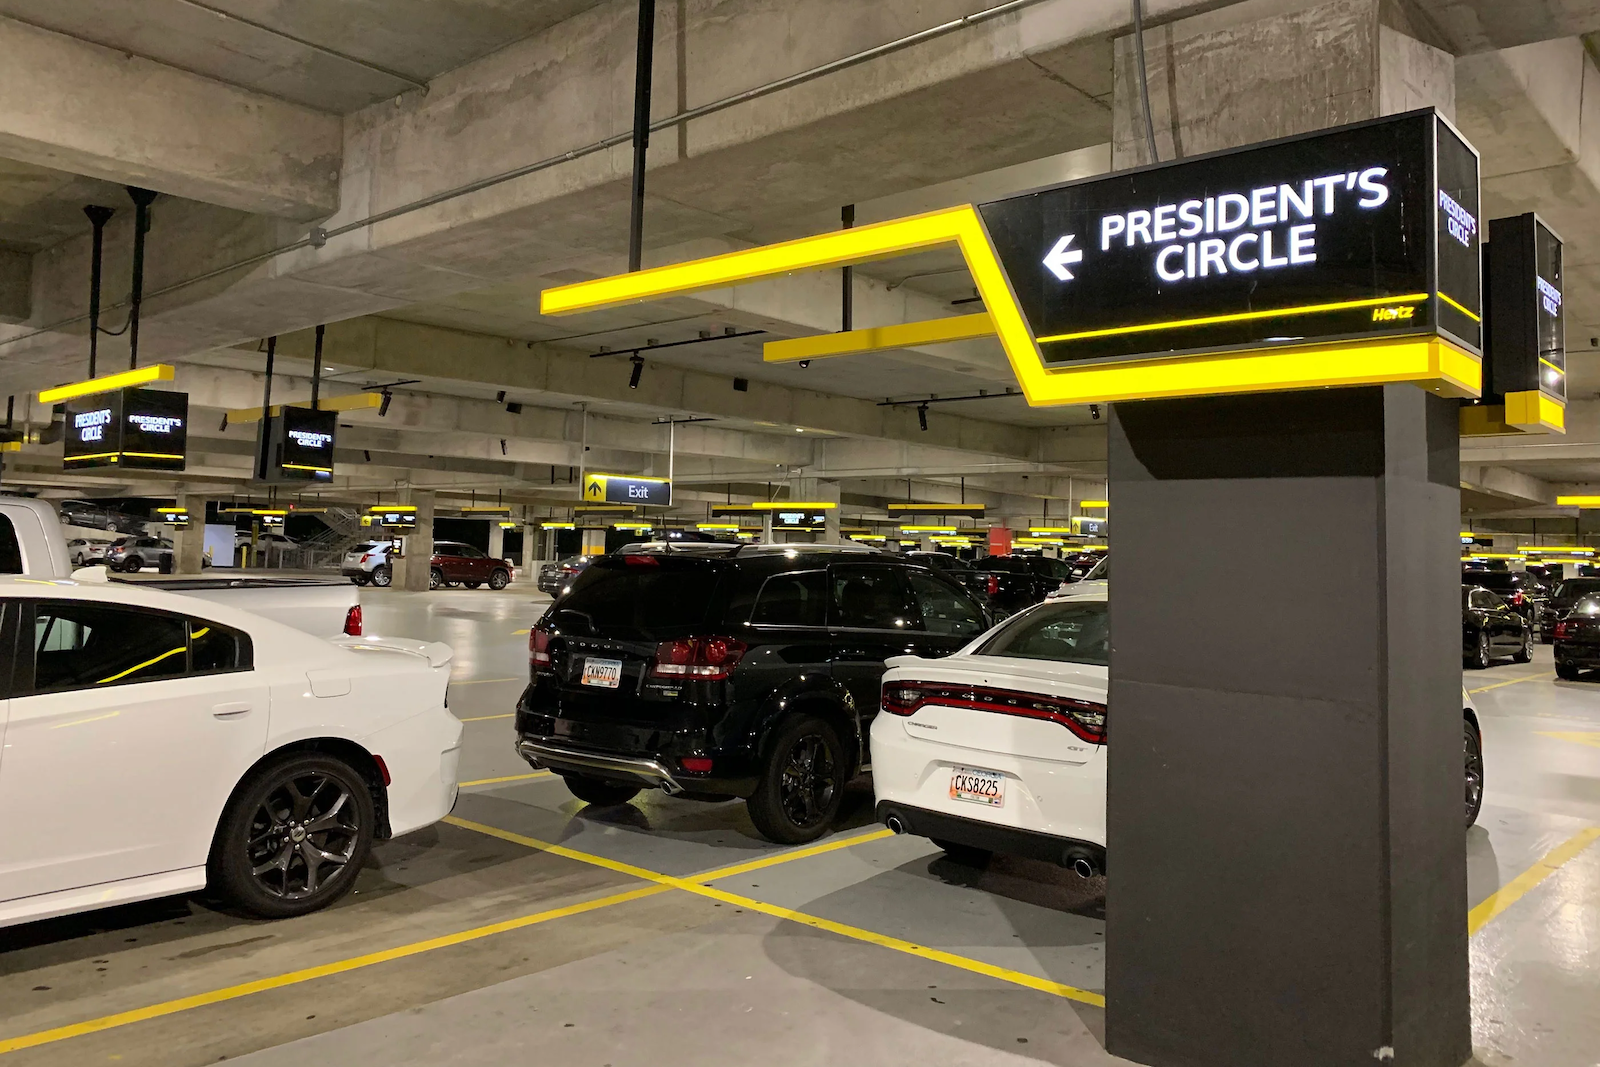 Rental cars next to a sign for Hertz President's Circle members